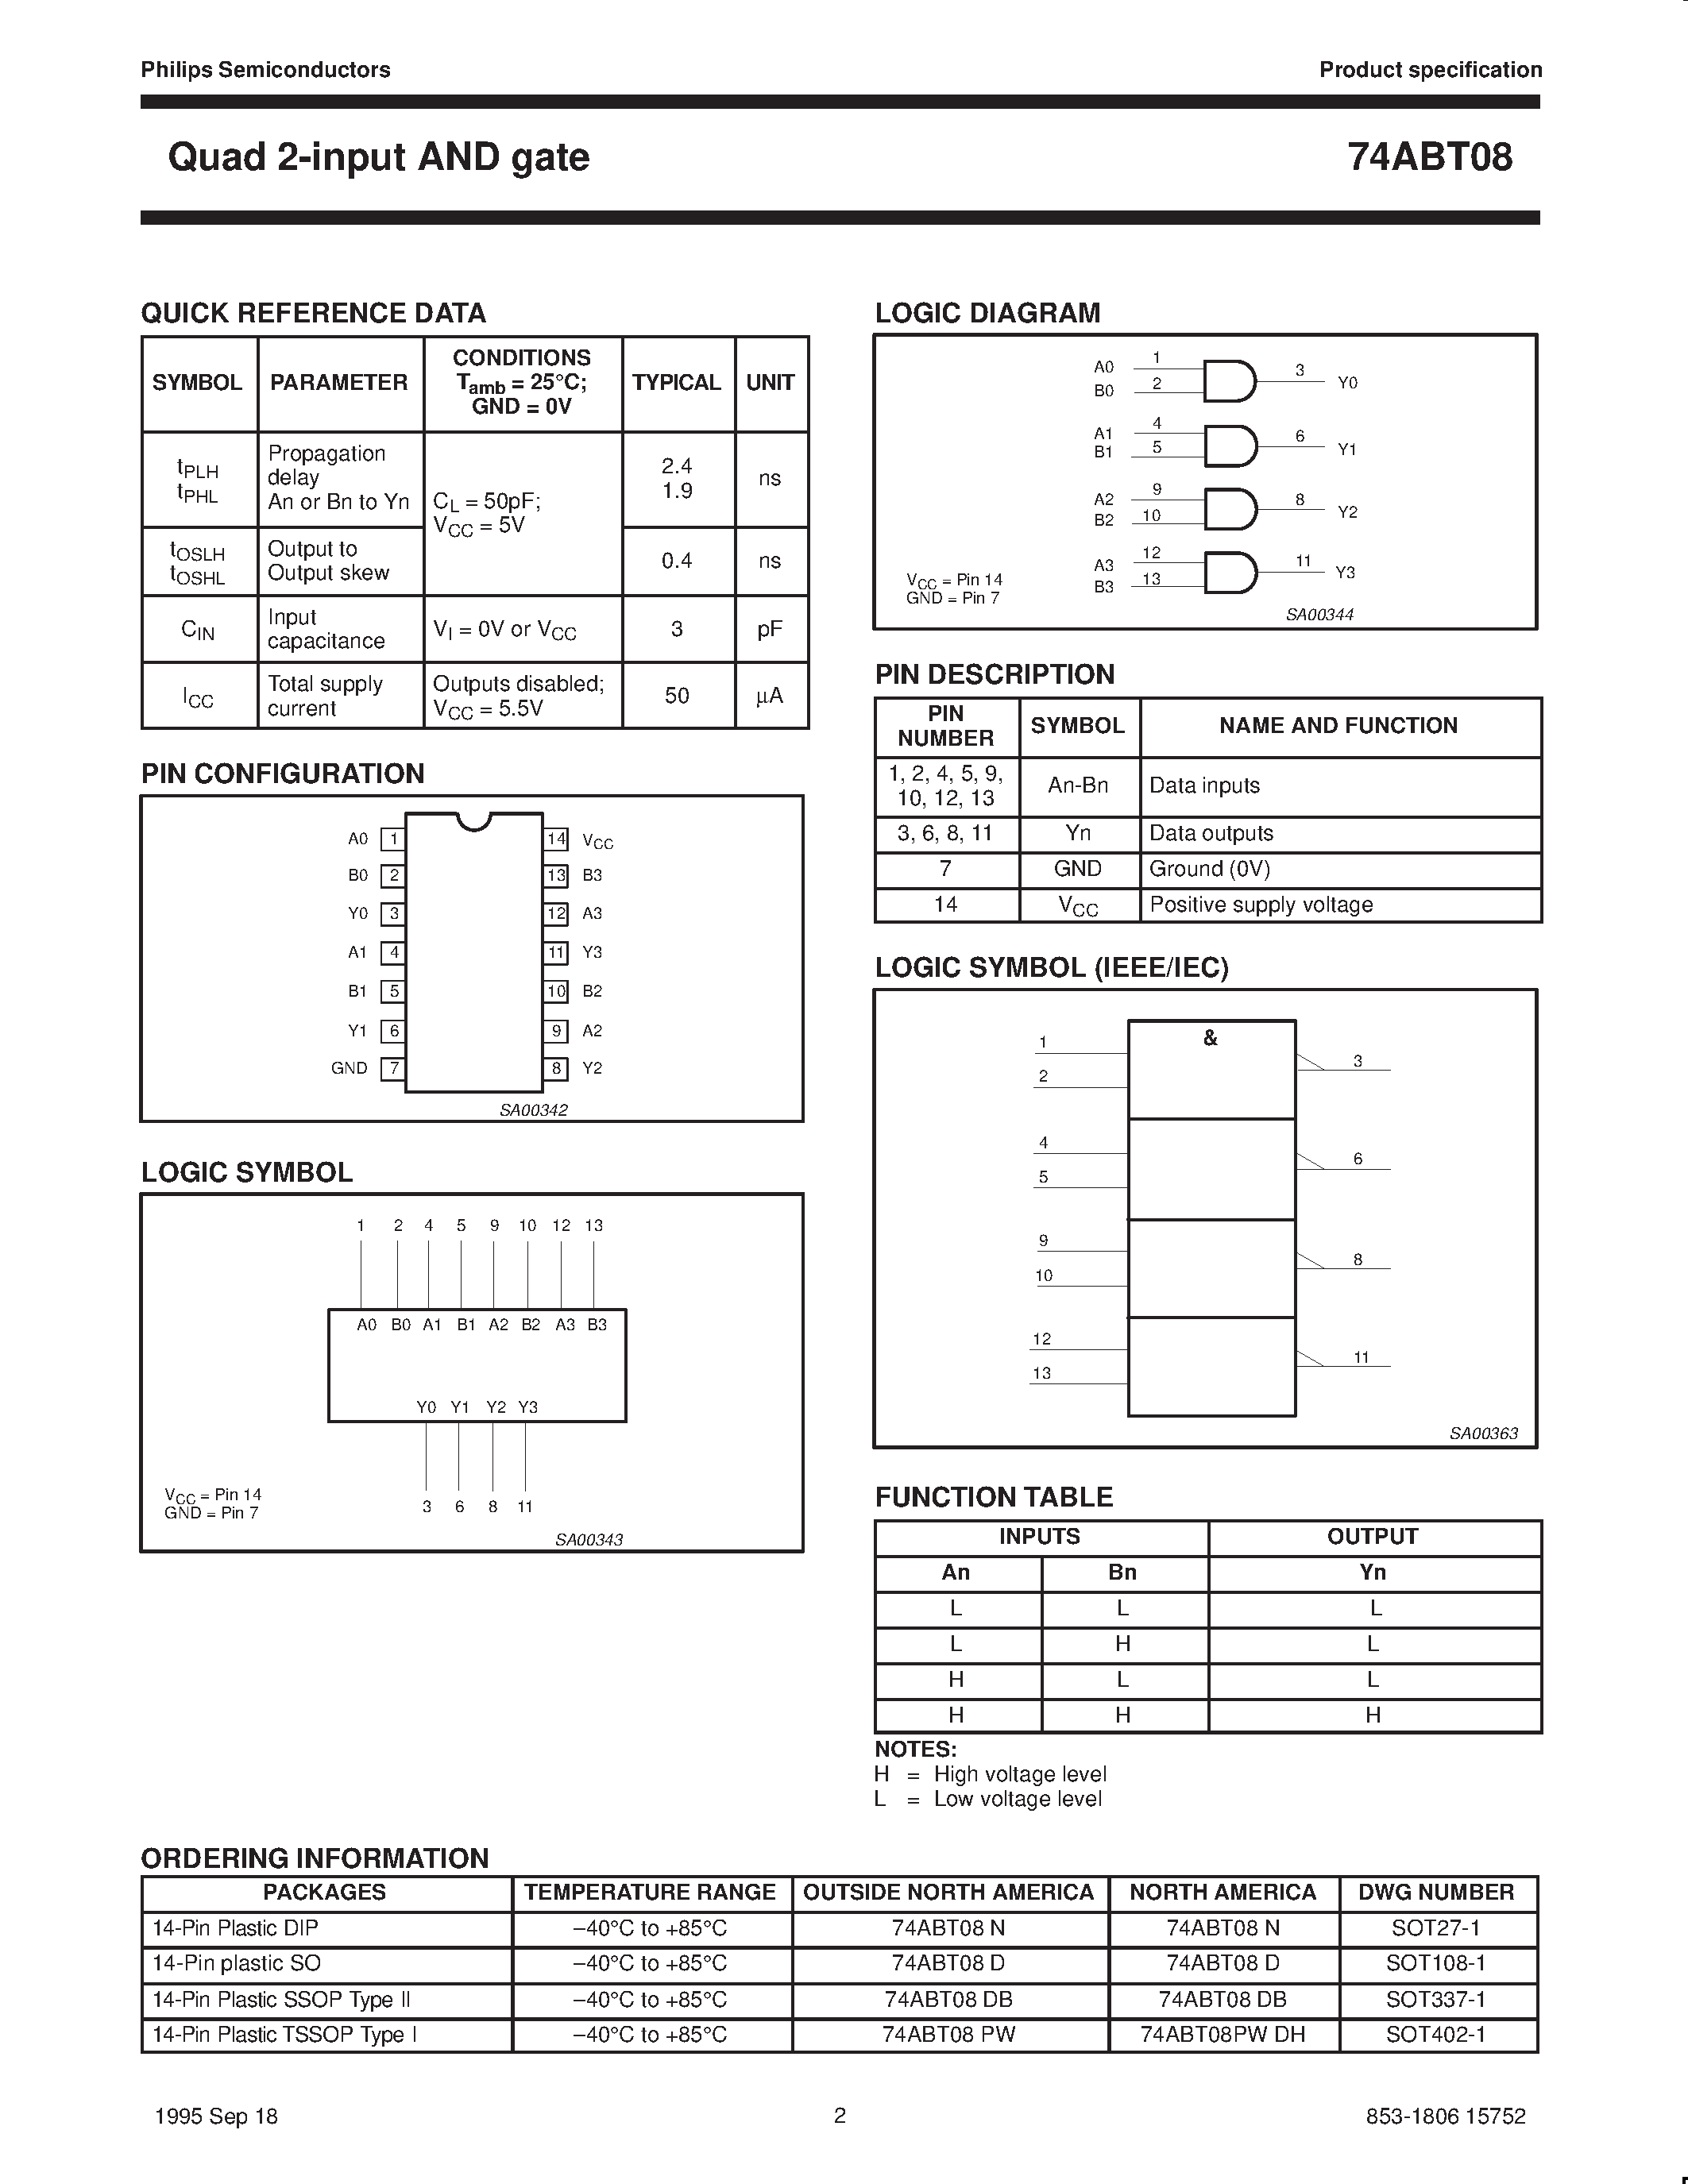 Datasheet 74ABT08PWDH - Quad 2-input AND gate page 2